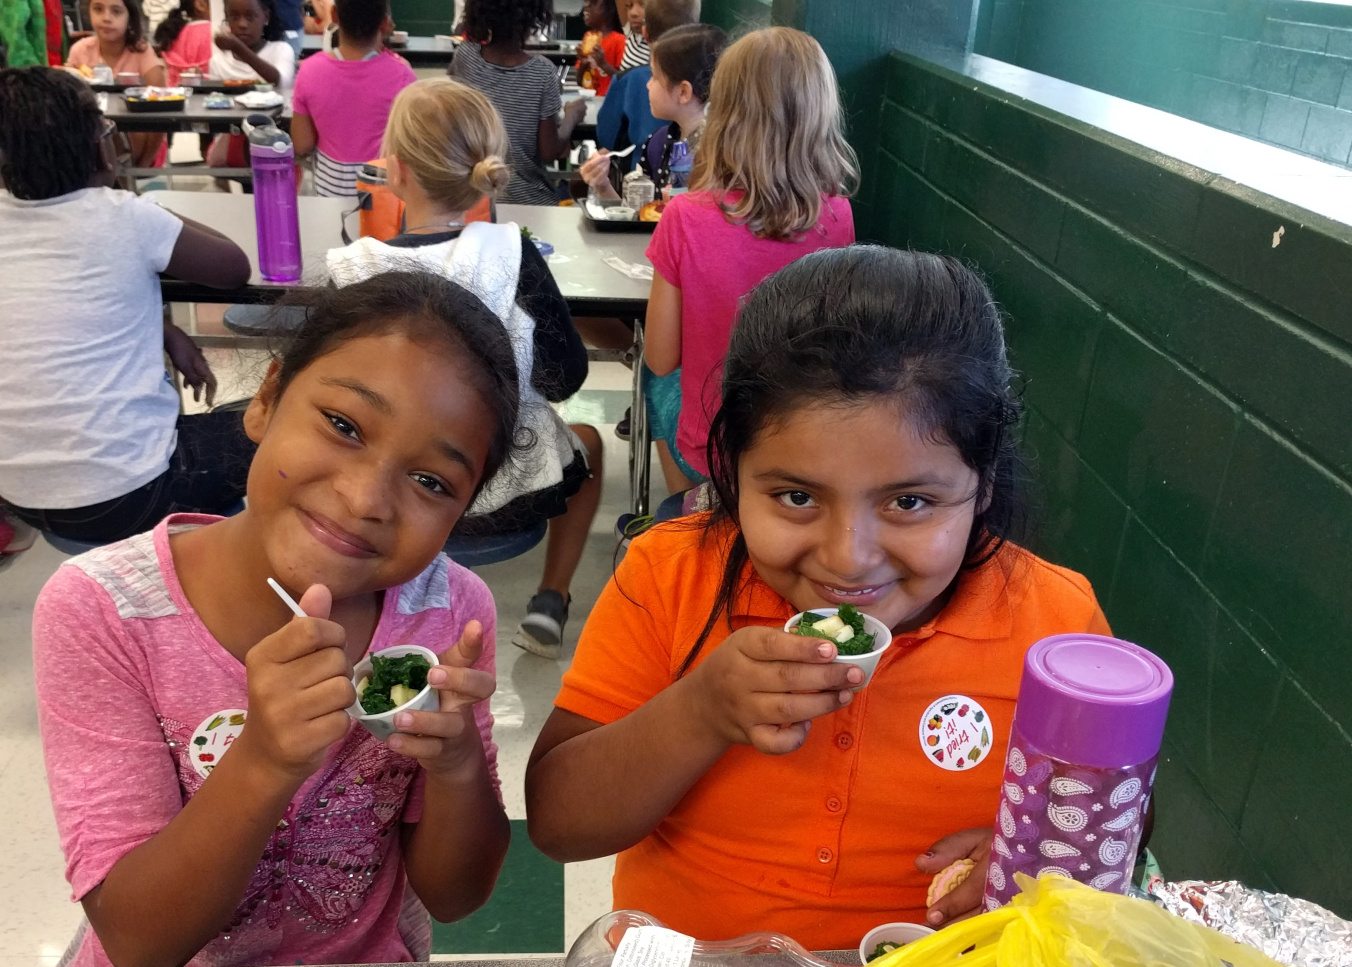 These Westwood Whirlwinds liked the kale salad!